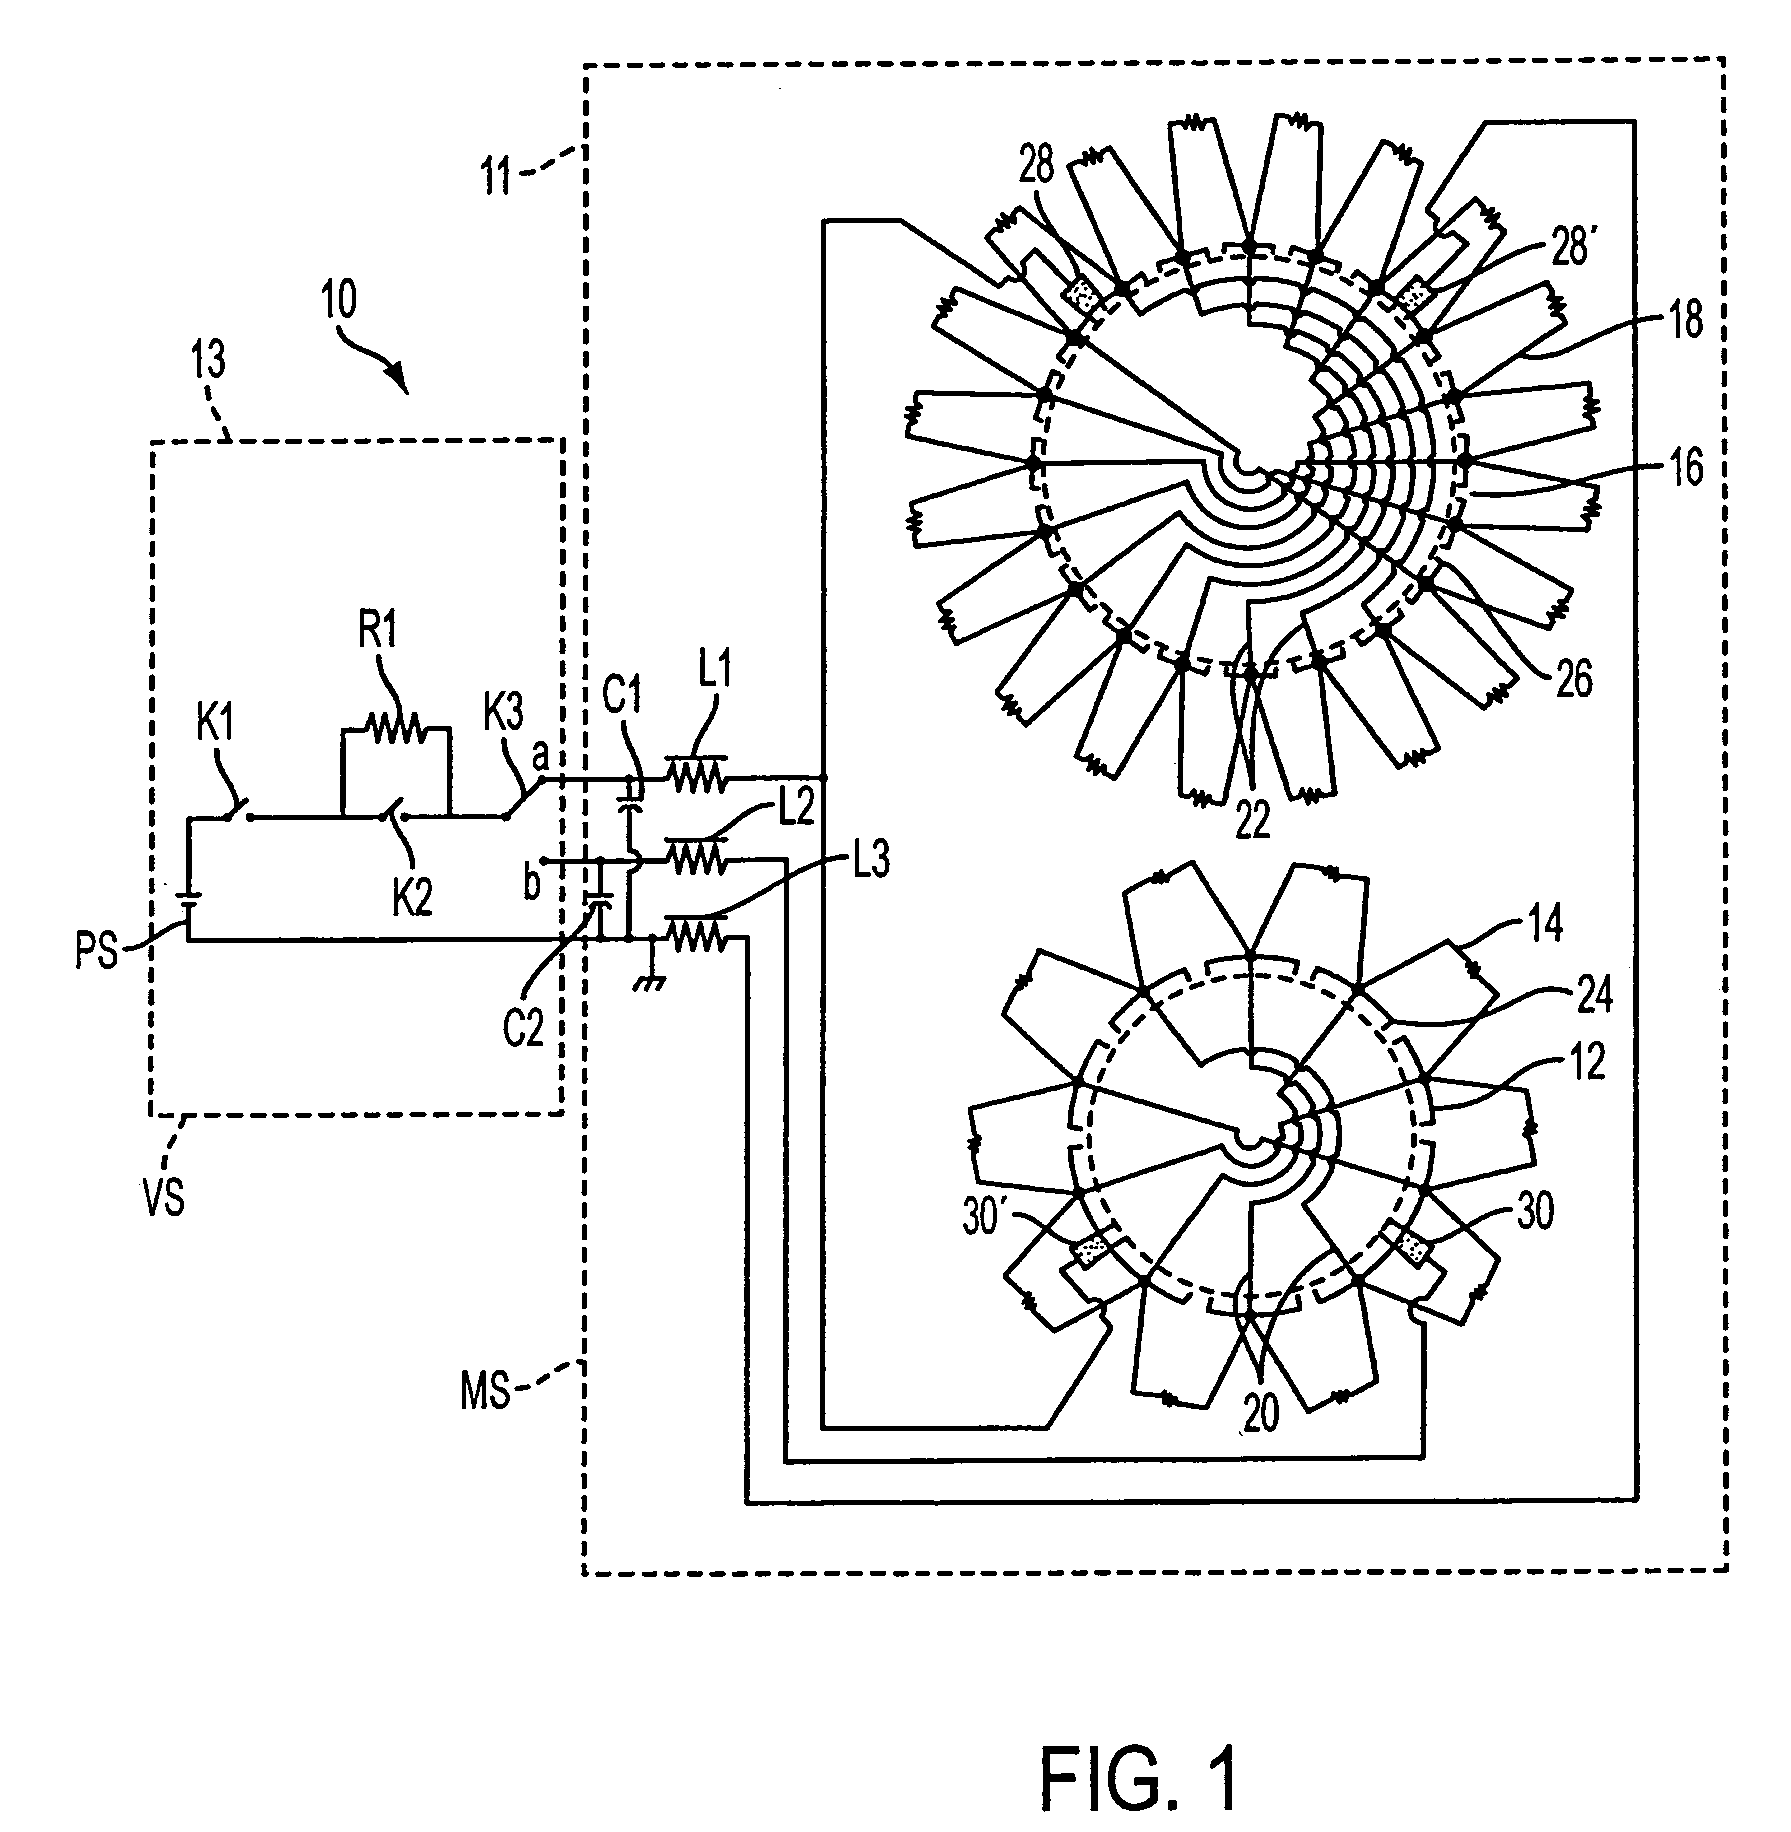 Multi-speed motor system combining at least a one speed electric motor, series resistor and power switches